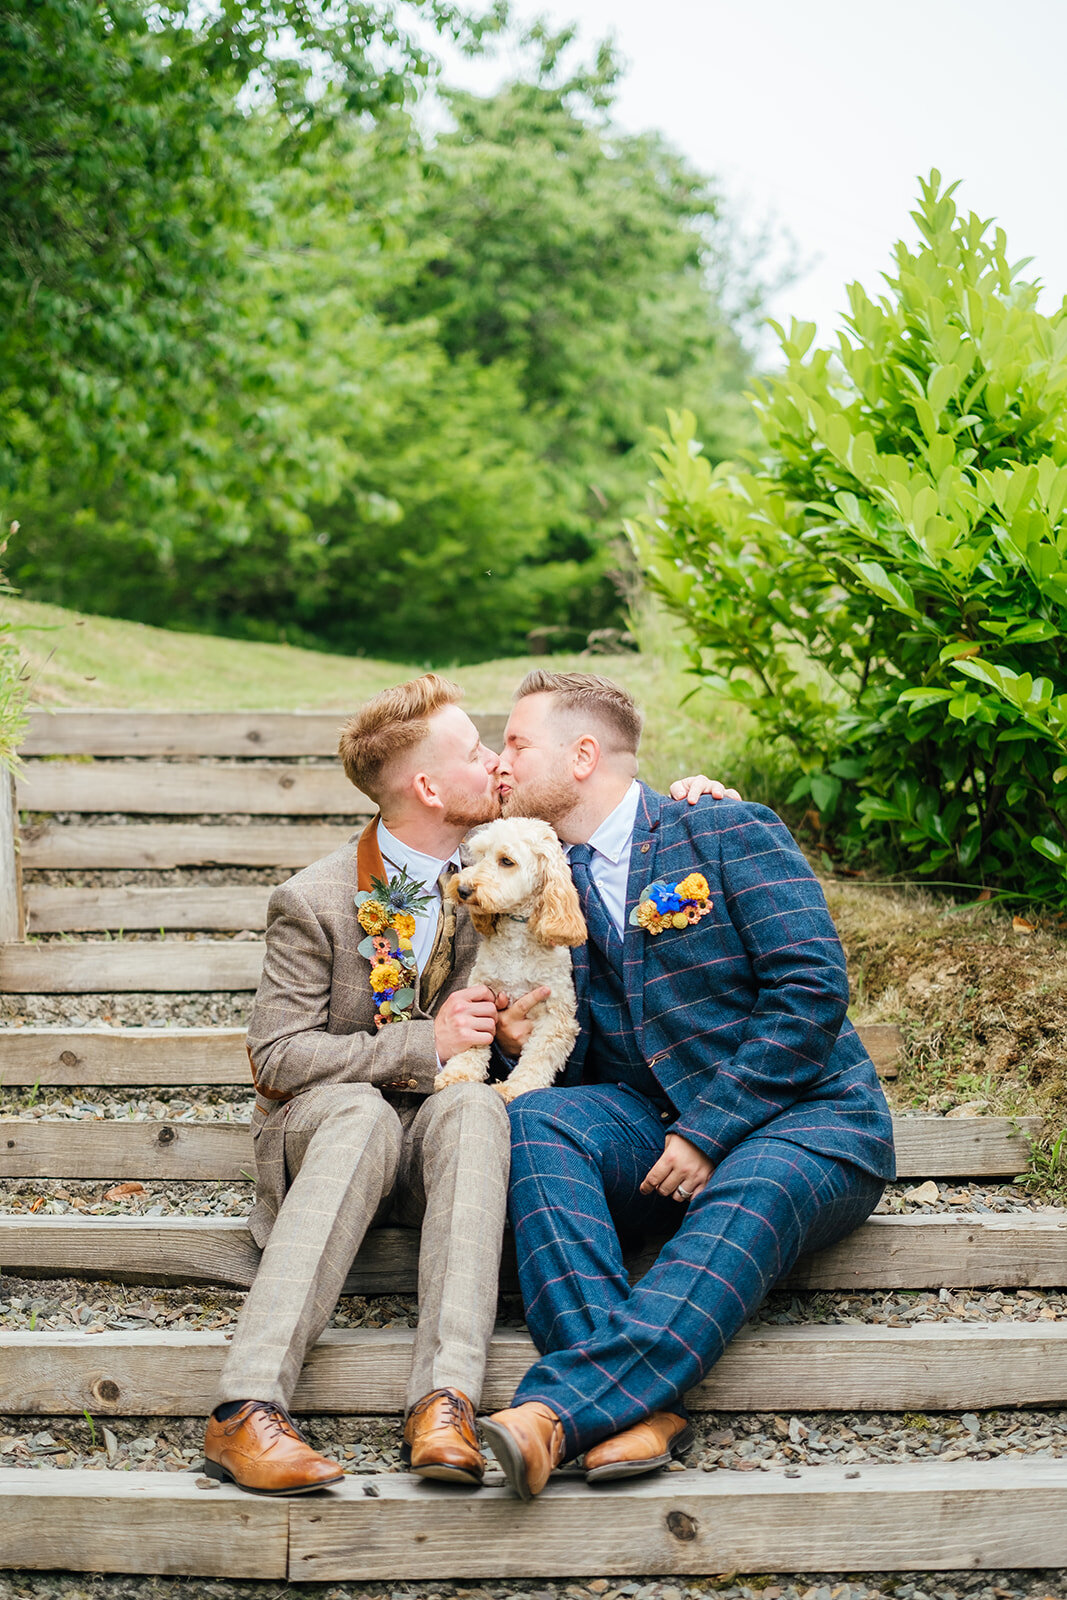 Kilminorth Cottages styled wedding shoot - Charlie Flounders Photography -0096